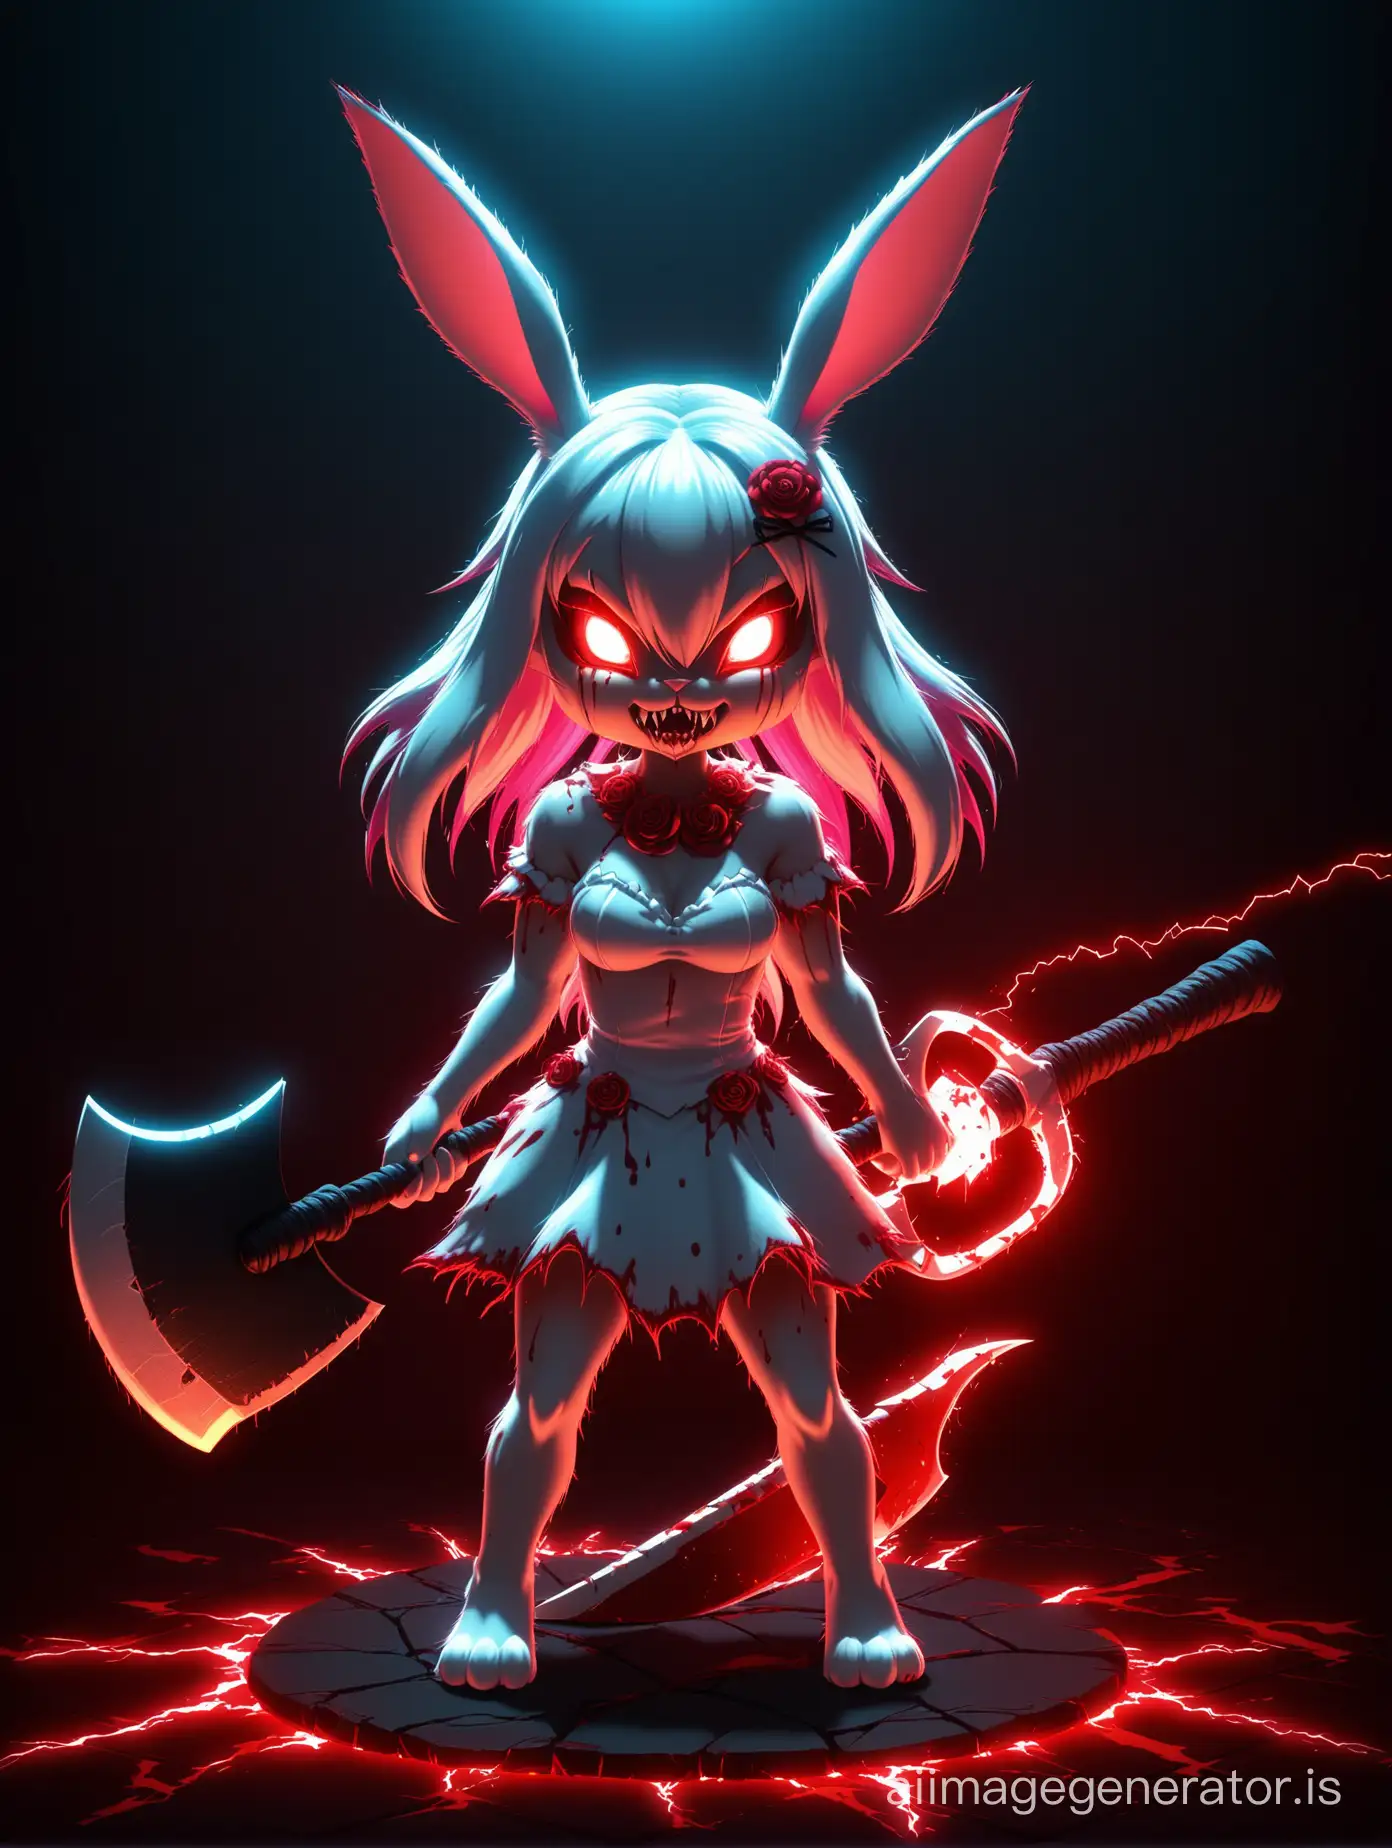 Sinister-Demonic-Rabbit-Girl-with-Axe-in-Fantasy-Anime-Style